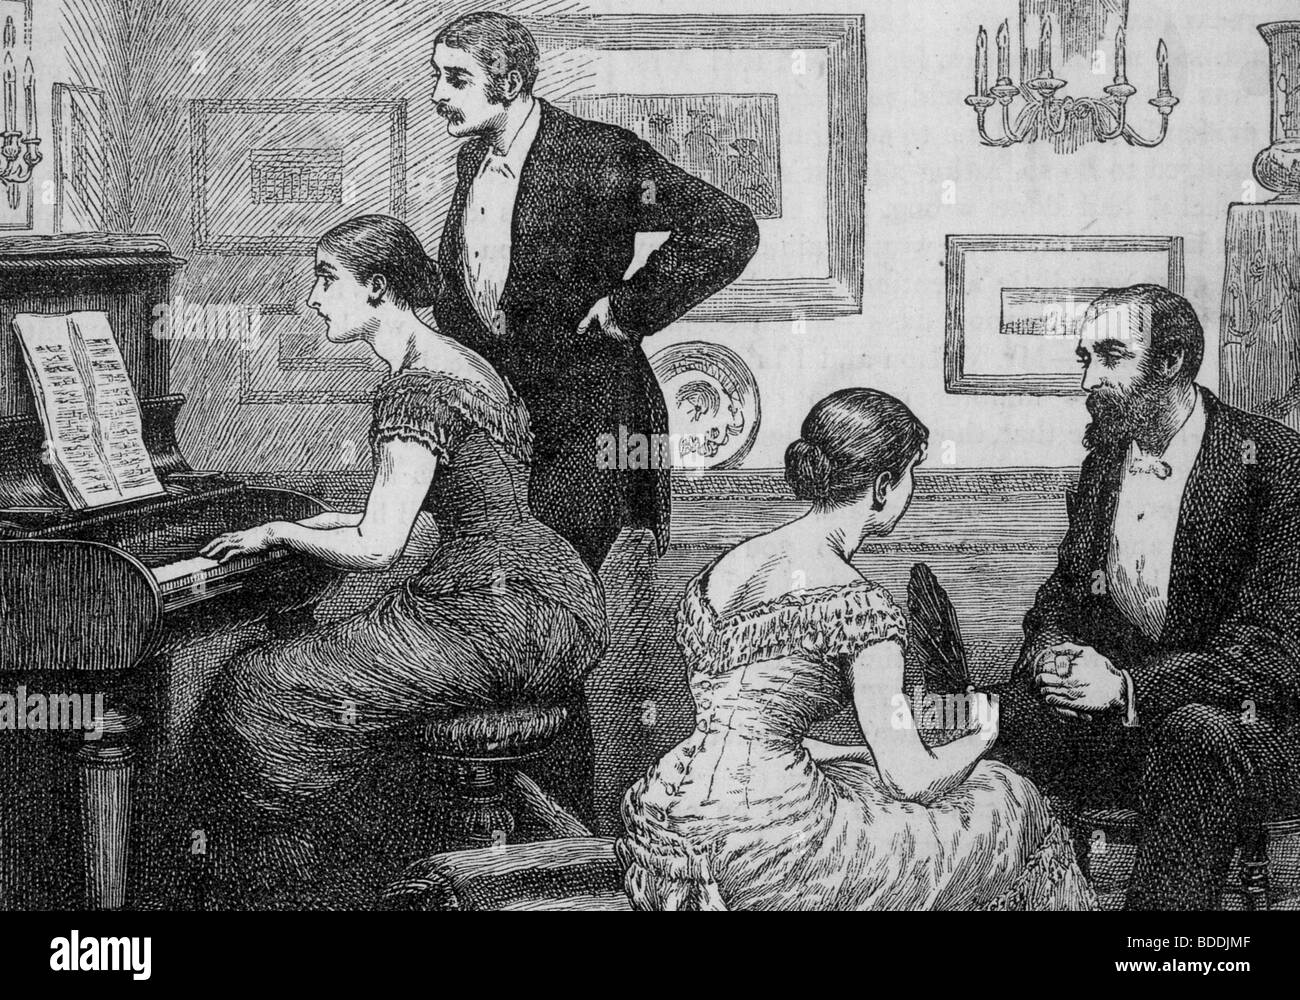 VICTORIAN DRAWING ROOM The lady at right fans herself in conversation while  her friend displays her musical talents Stock Photo - Alamy